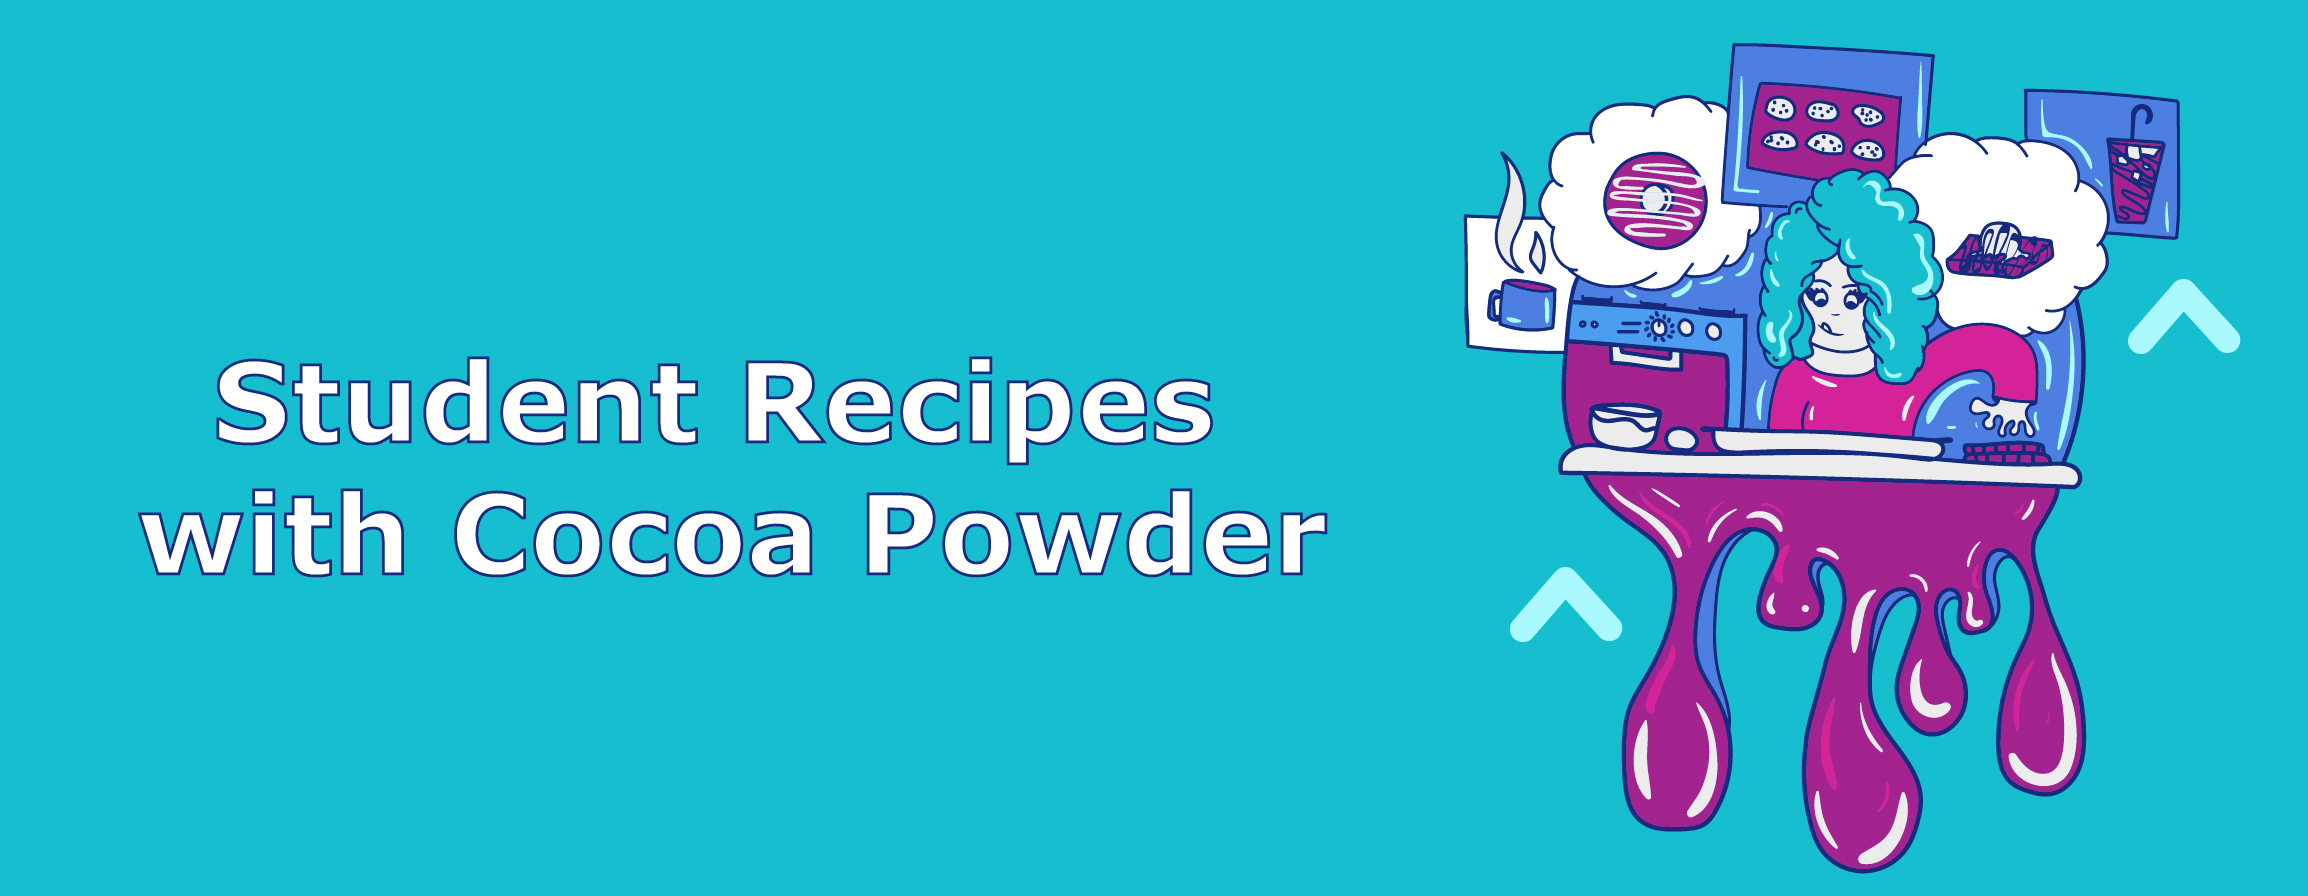 Student Recipes with Cocoa Powder